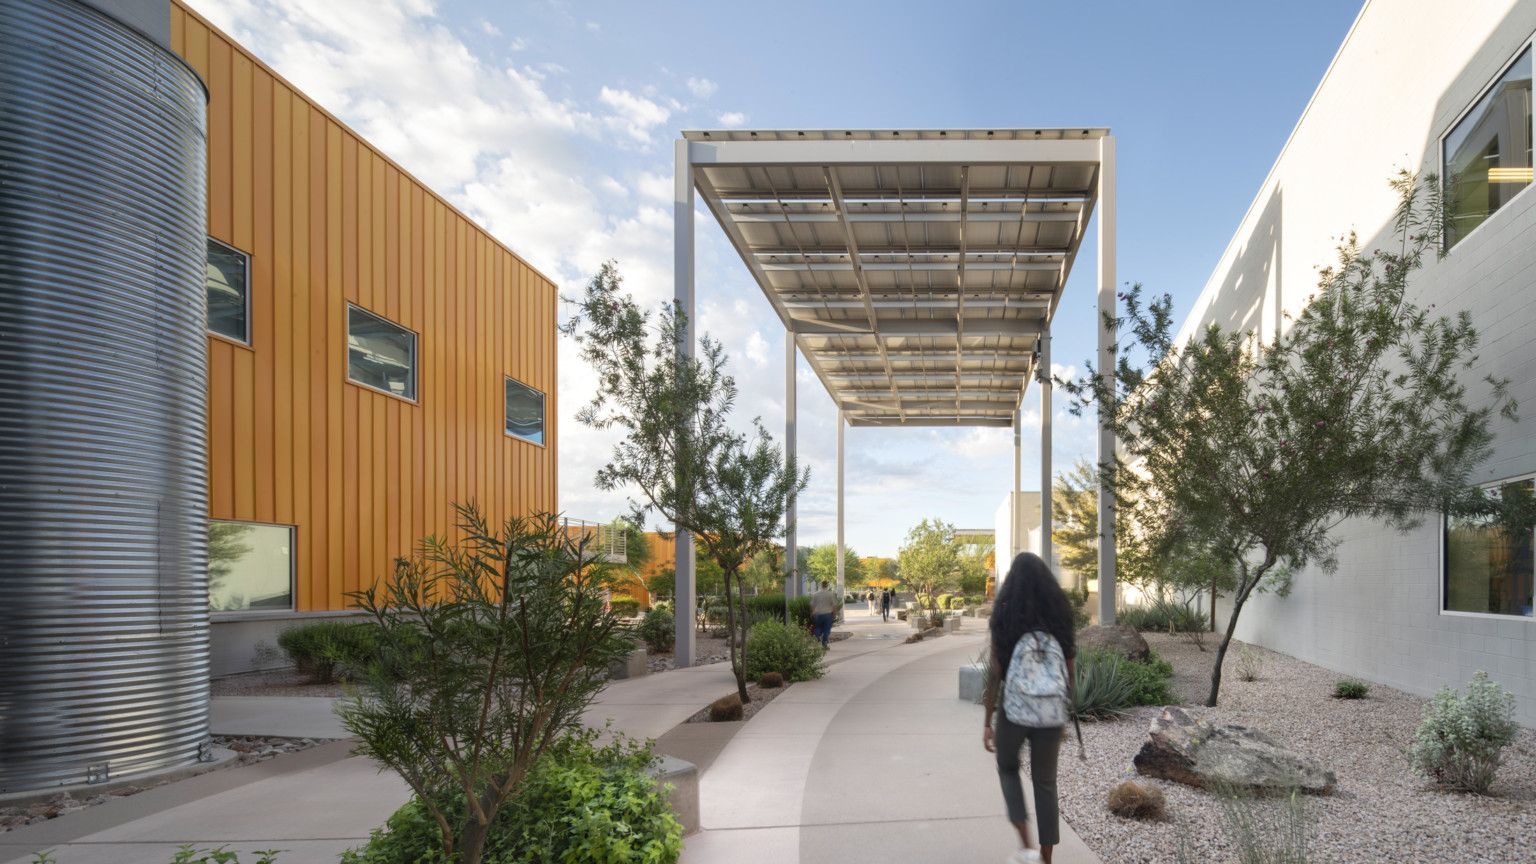 Student walking down an outdoor path with solar canopy above and an orange metal cladding building on left